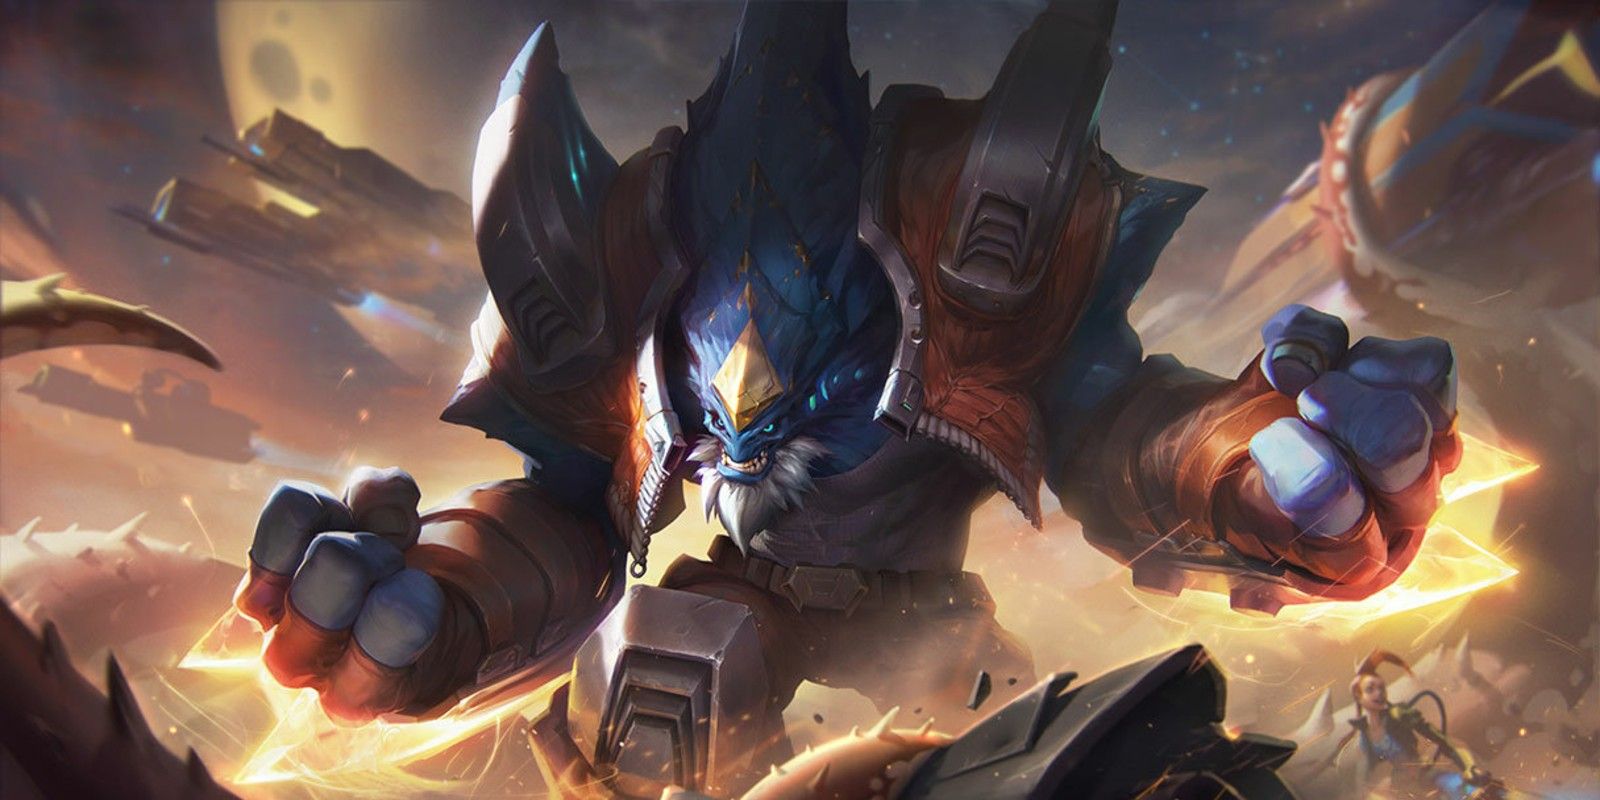 Malphite has two skin variants players can unlock and use in League of Legends: Wild Rift